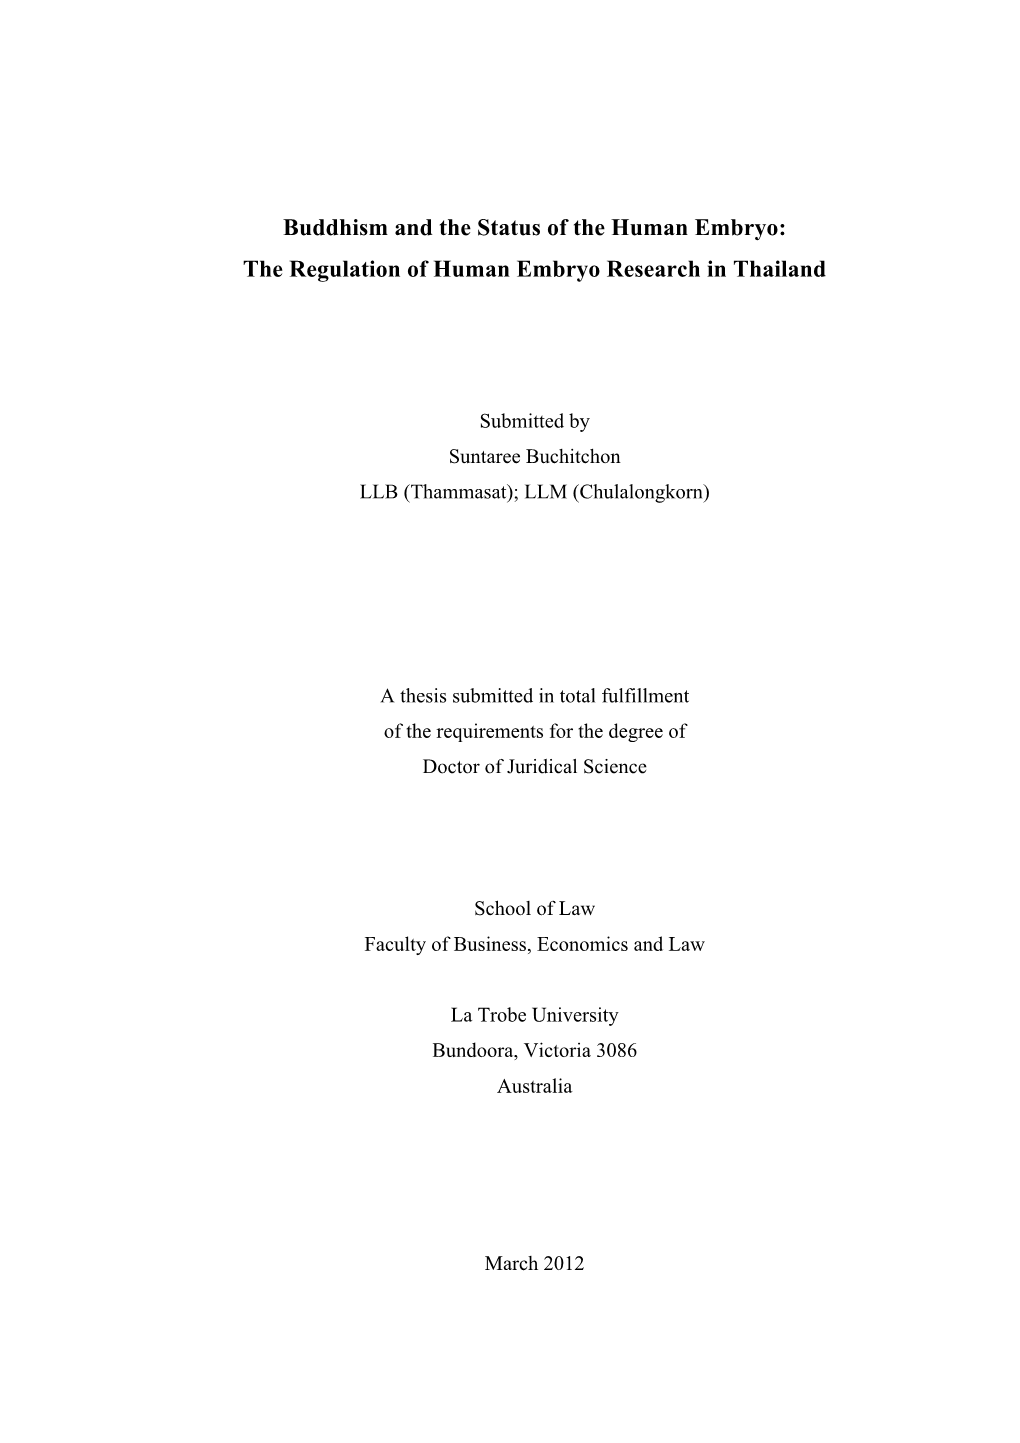 Buddhism and the Status of the Human Embryo: the Regulation of Human Embryo Research in Thailand